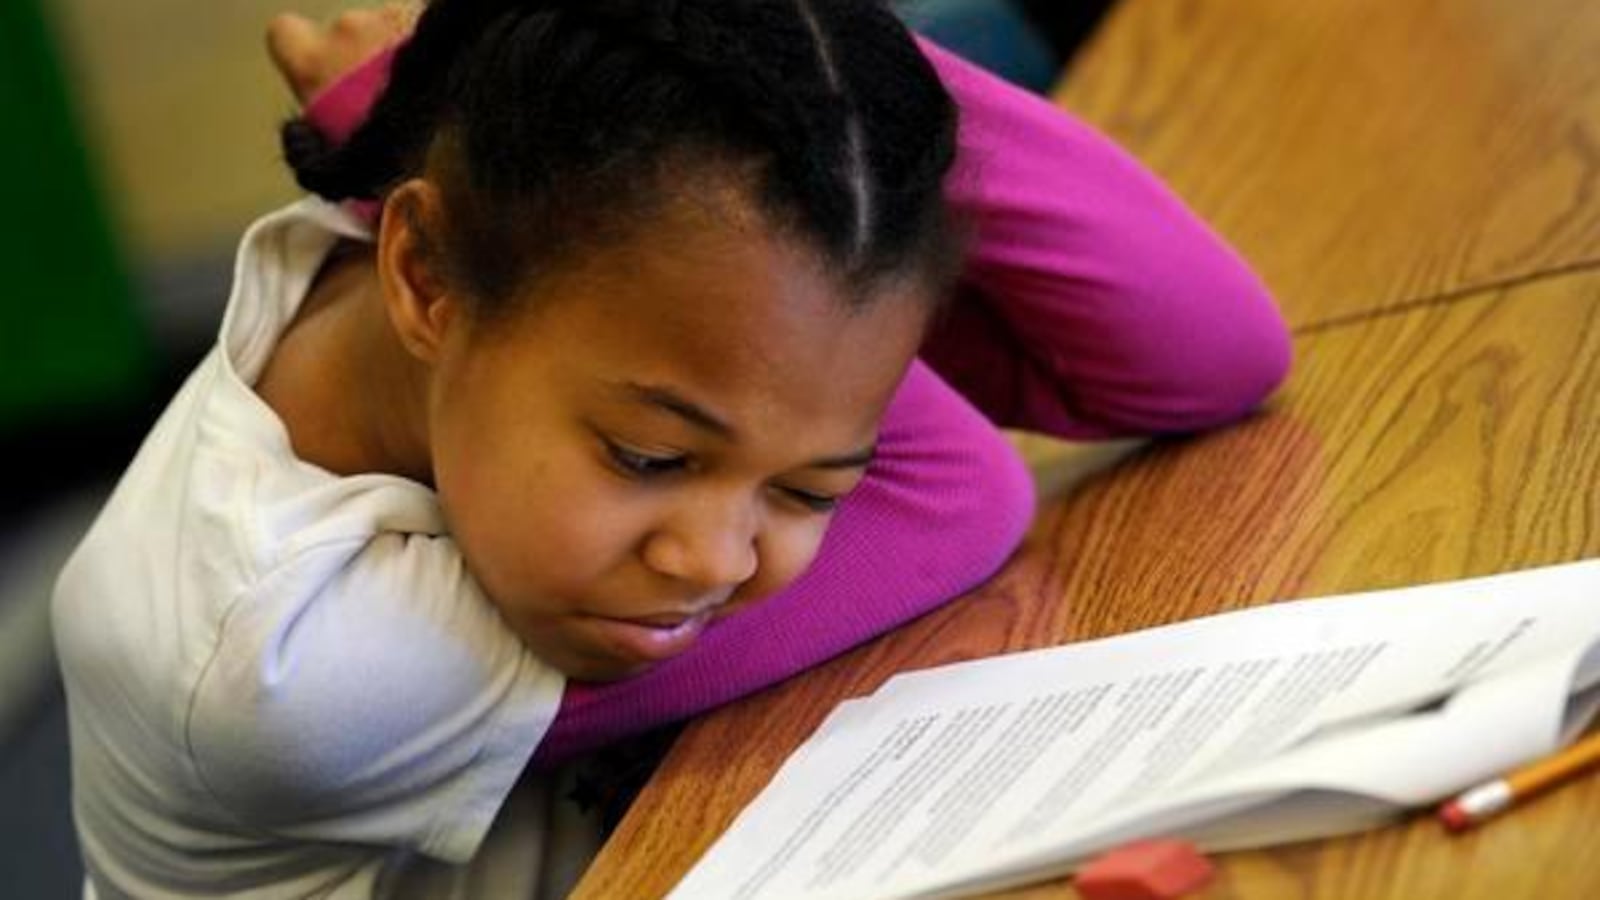 Dayanna Brown, 9, a student at Denver's Stedman Elementary, tries to focus on a mock state exam in 2010.